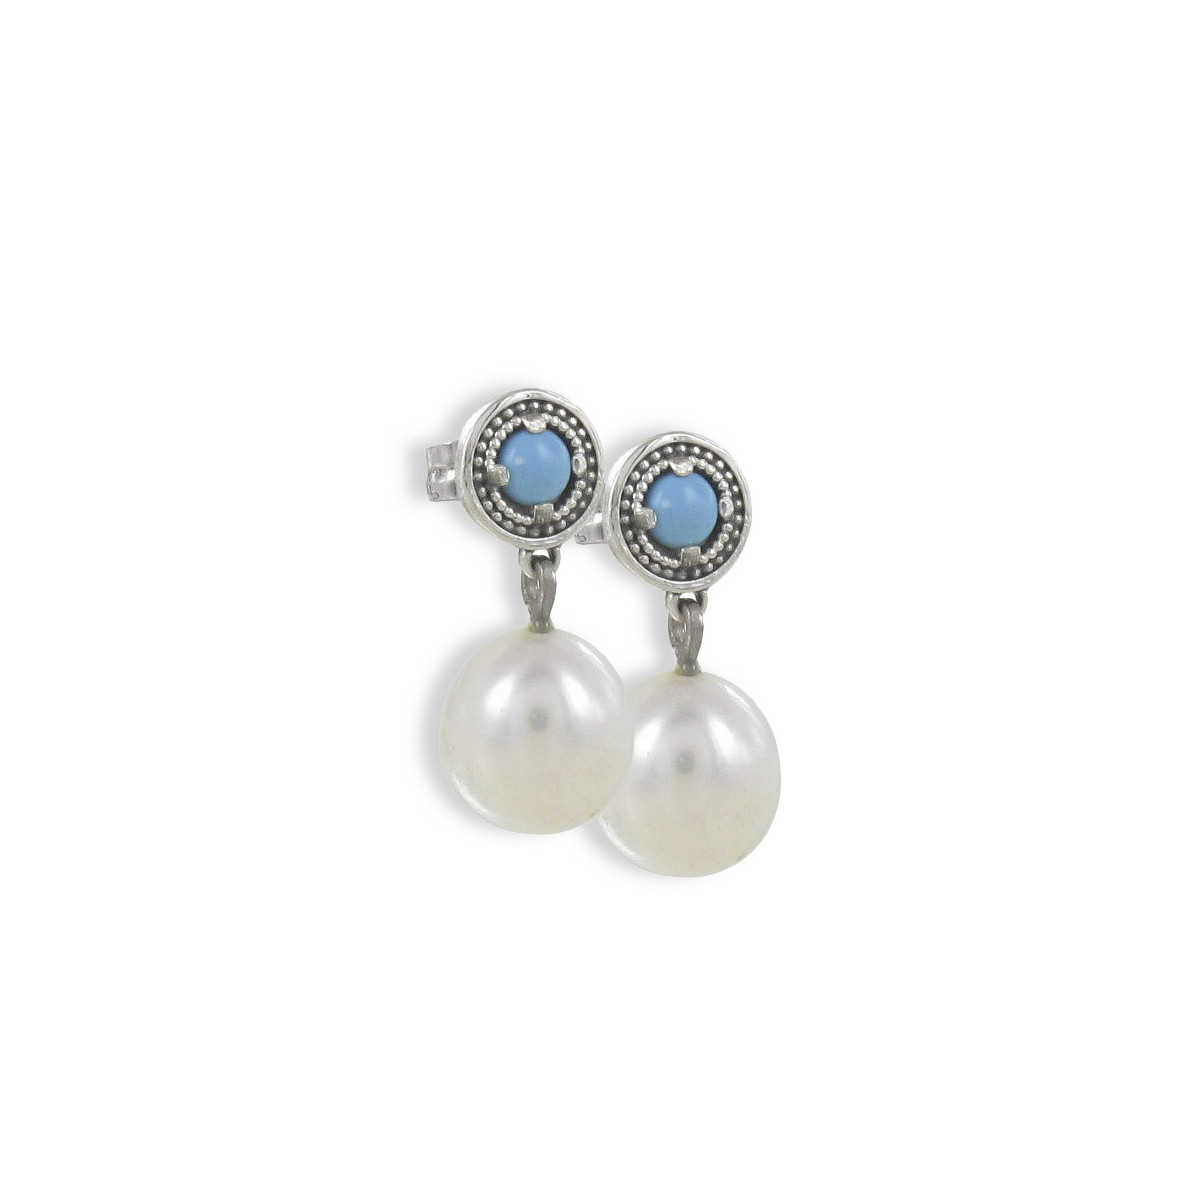 TURQUOISE AND CULTIVATED PEARL EARRINGS